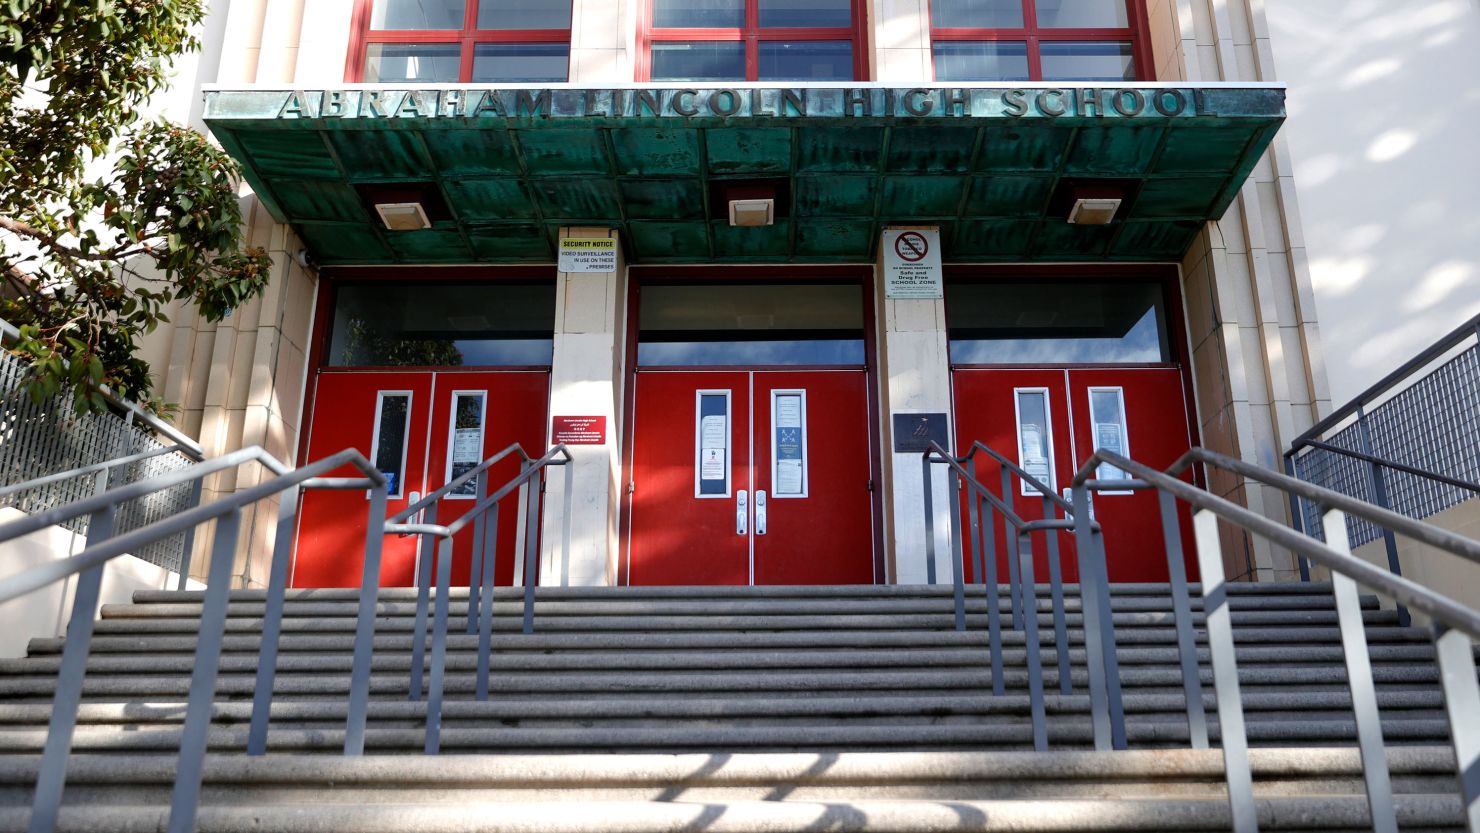 Abraham Lincoln High School is one of dozens of school that San Francisco Unified School District officials voted to rename in January.